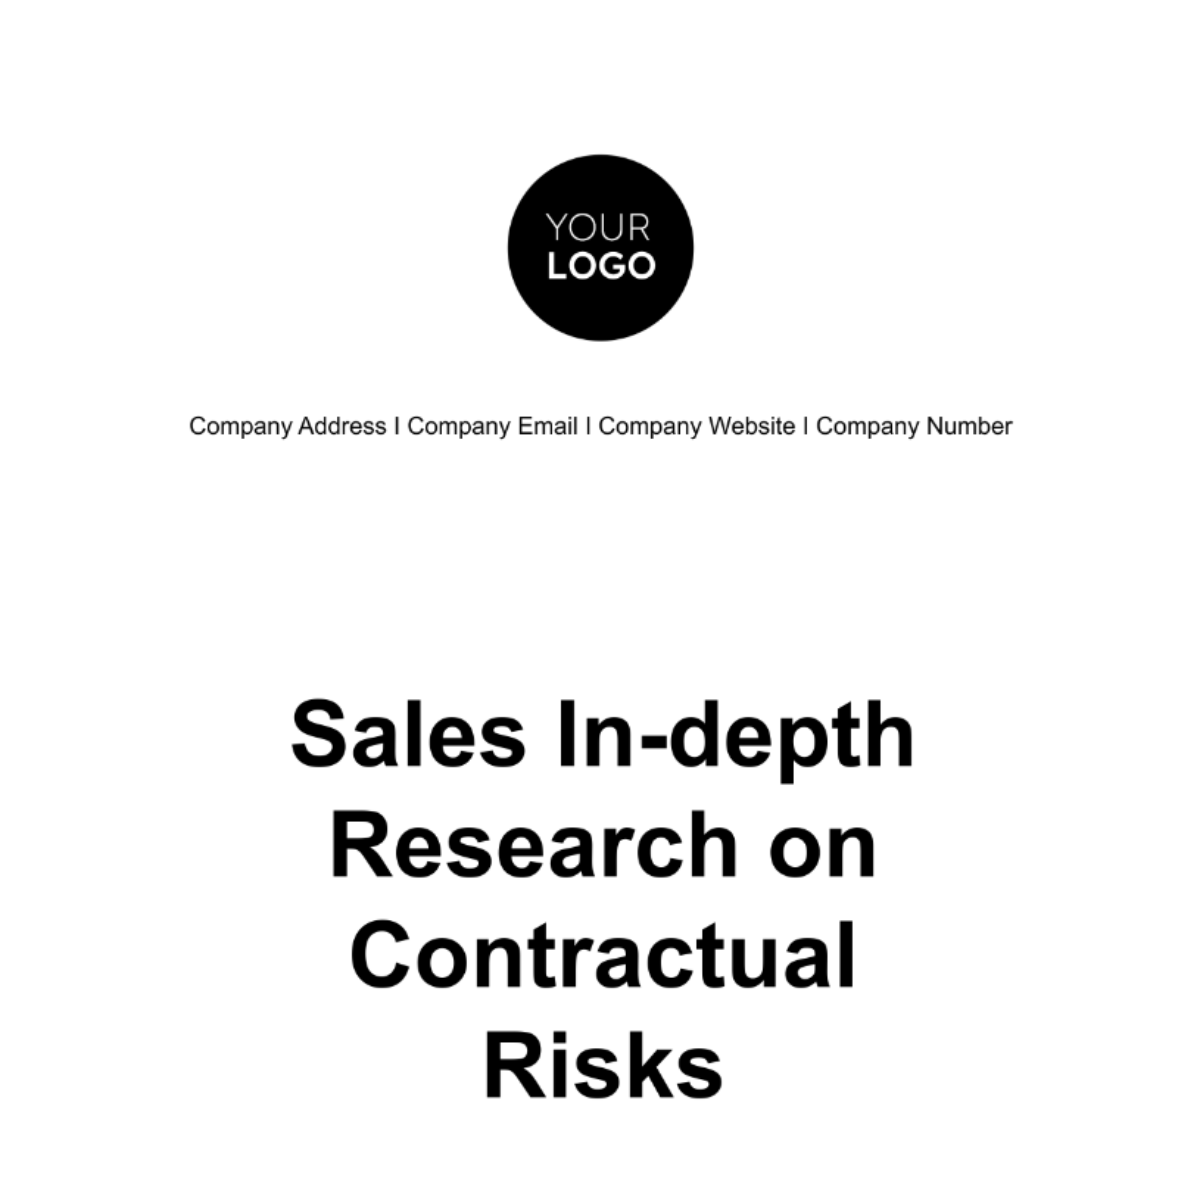 Sales In-depth Research on Contractual Risks Template